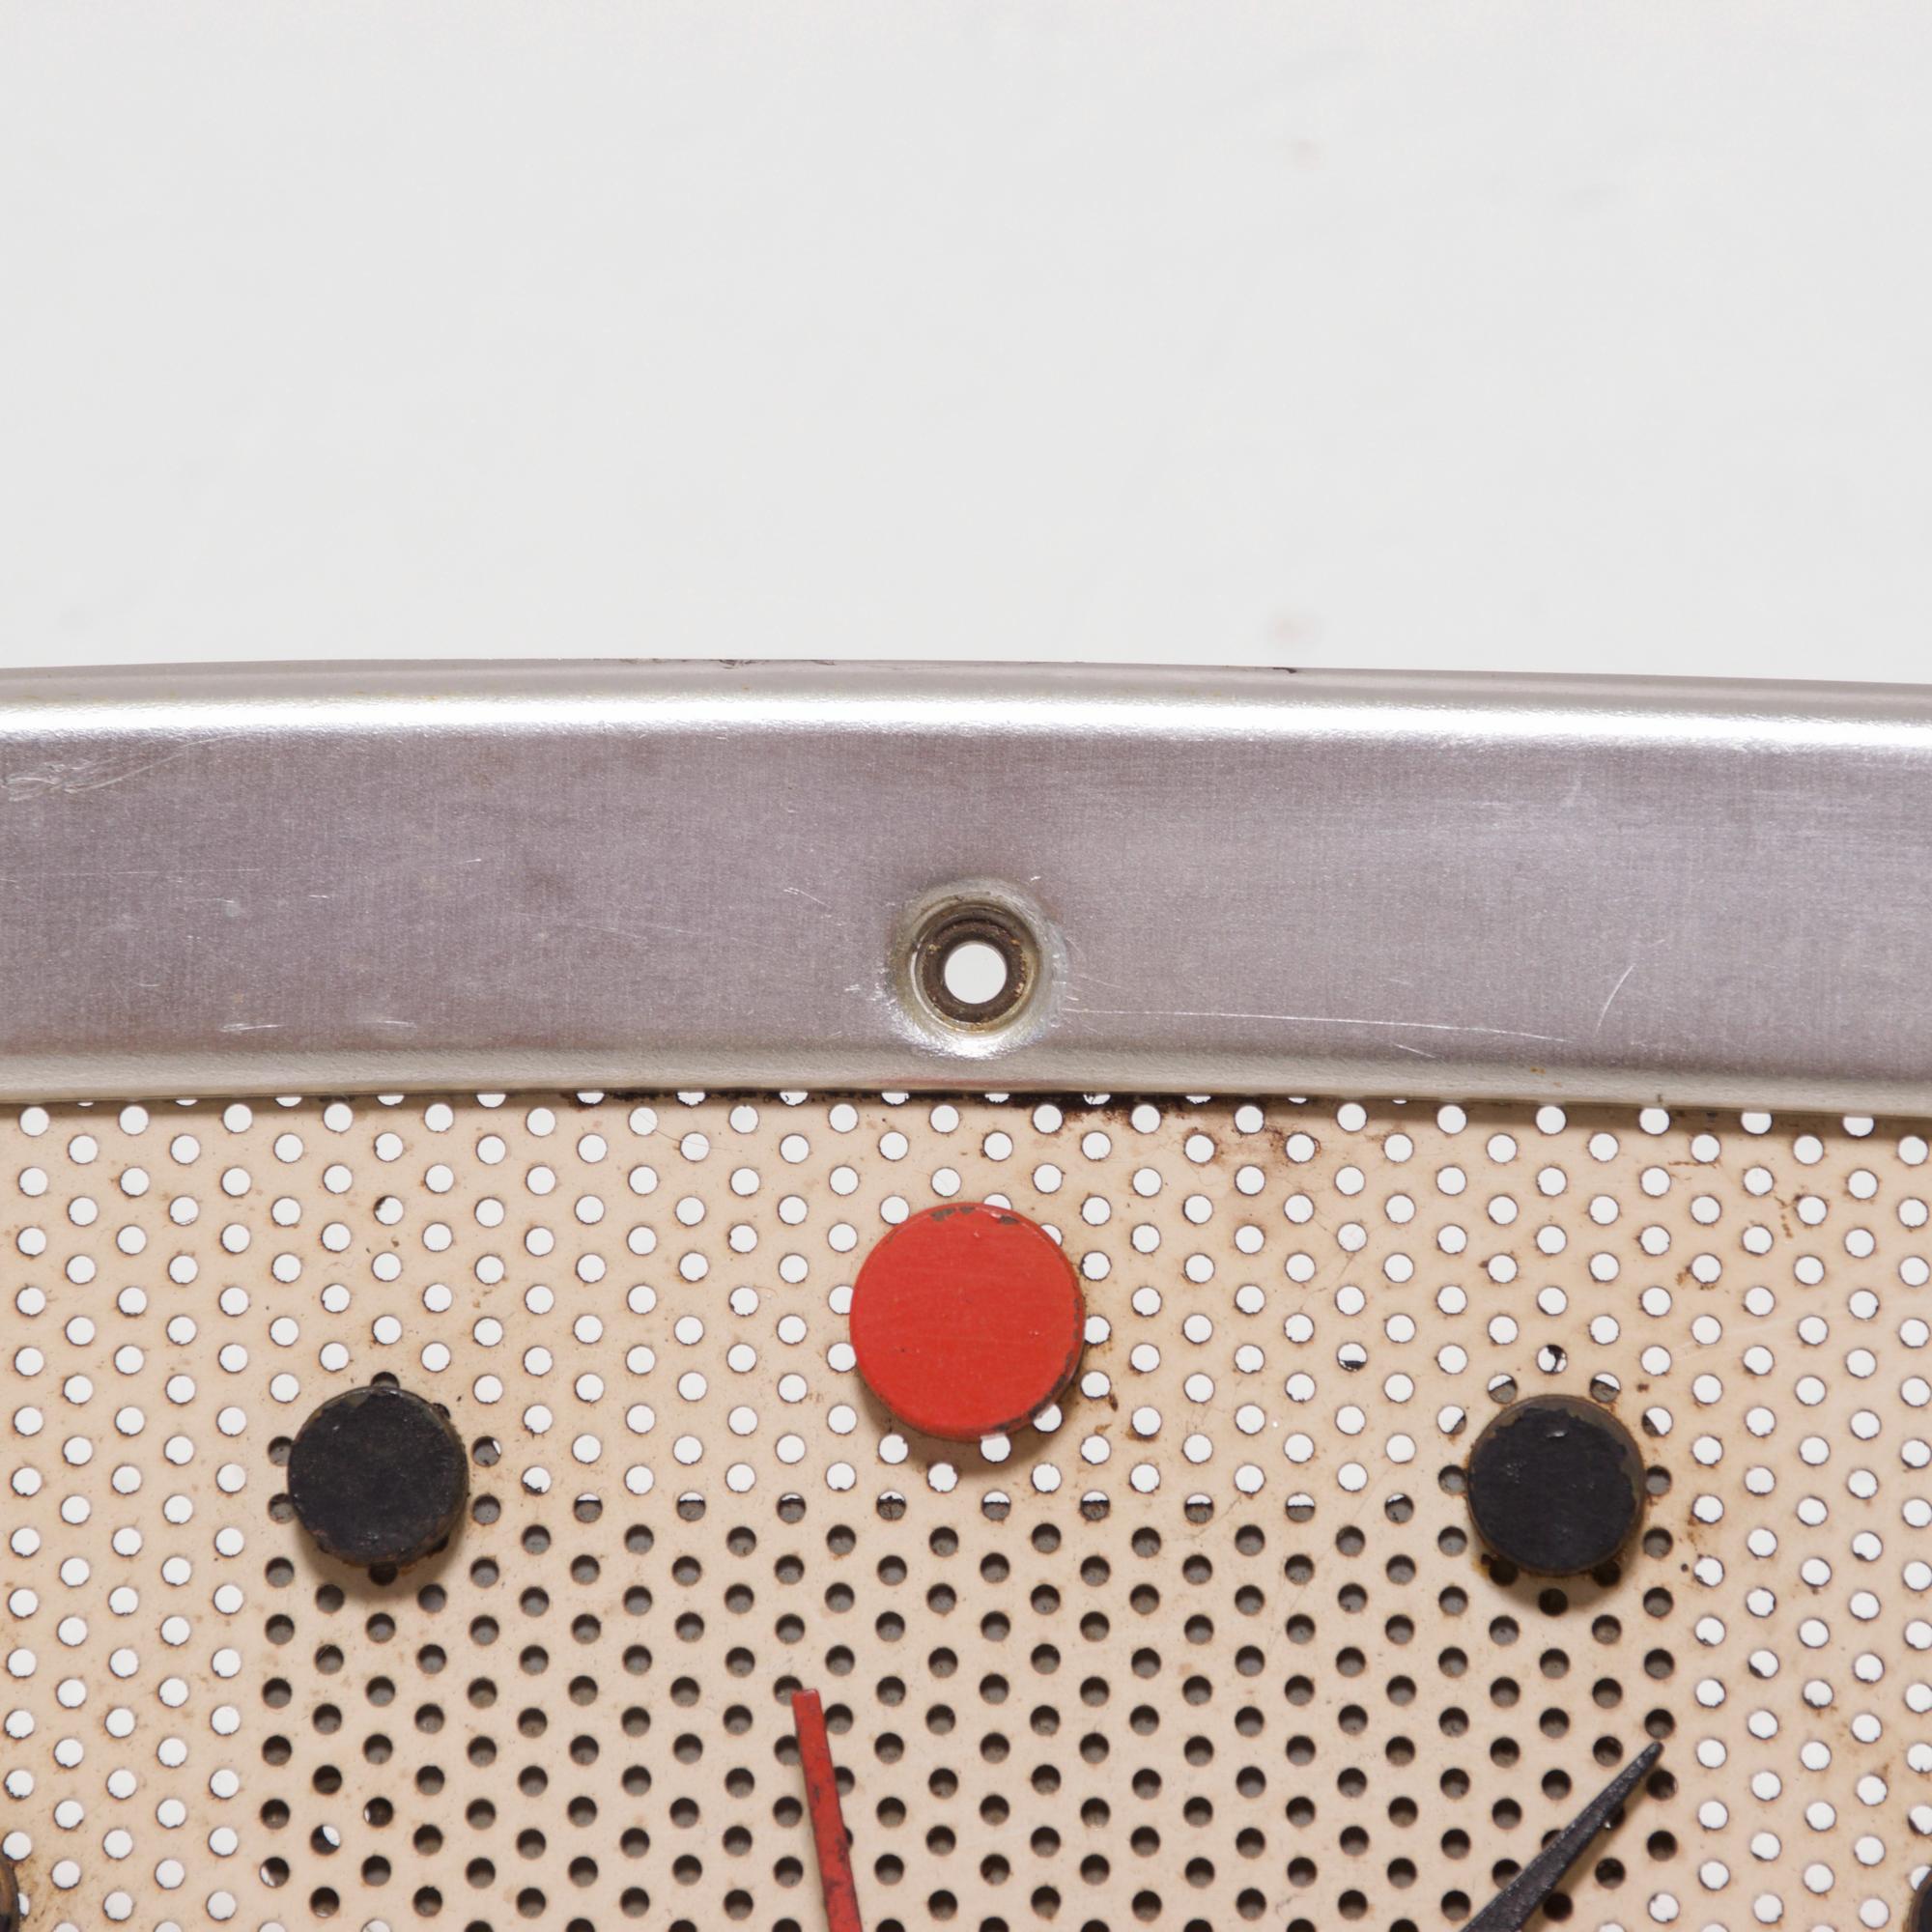 Vintage electric wall-mounted clock face by NuTone L-35 model Telechron chime clock, USA, circa 1957.
Style reminiscent of Herman Miller
Classic midcentury styling, face is white painted perforated metal was designed to allow sound to exit. Outer